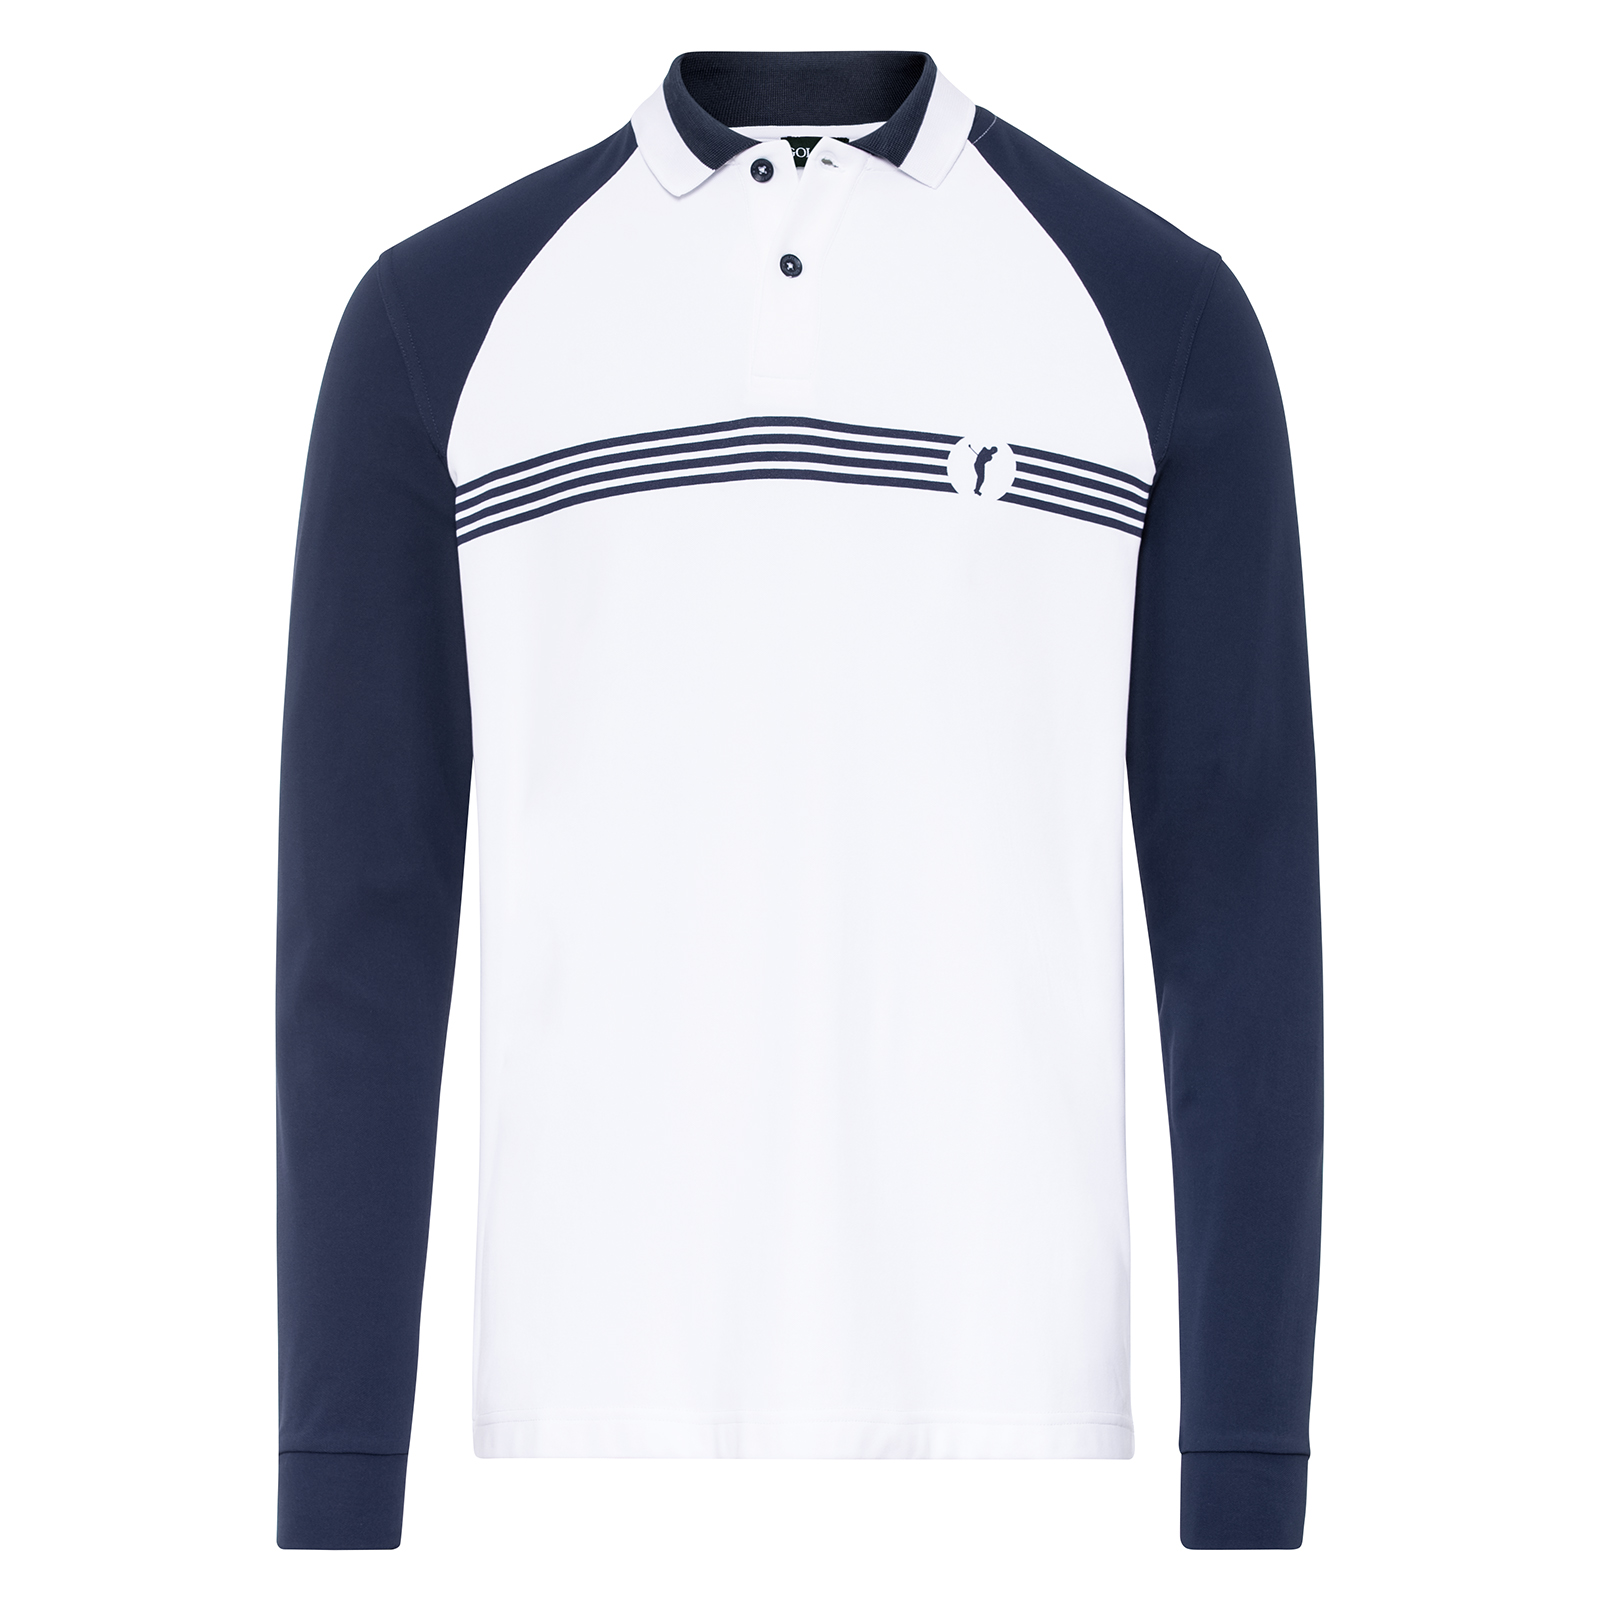 Men's long-sleeved polo shirt with new logo design and moisture-regulating function